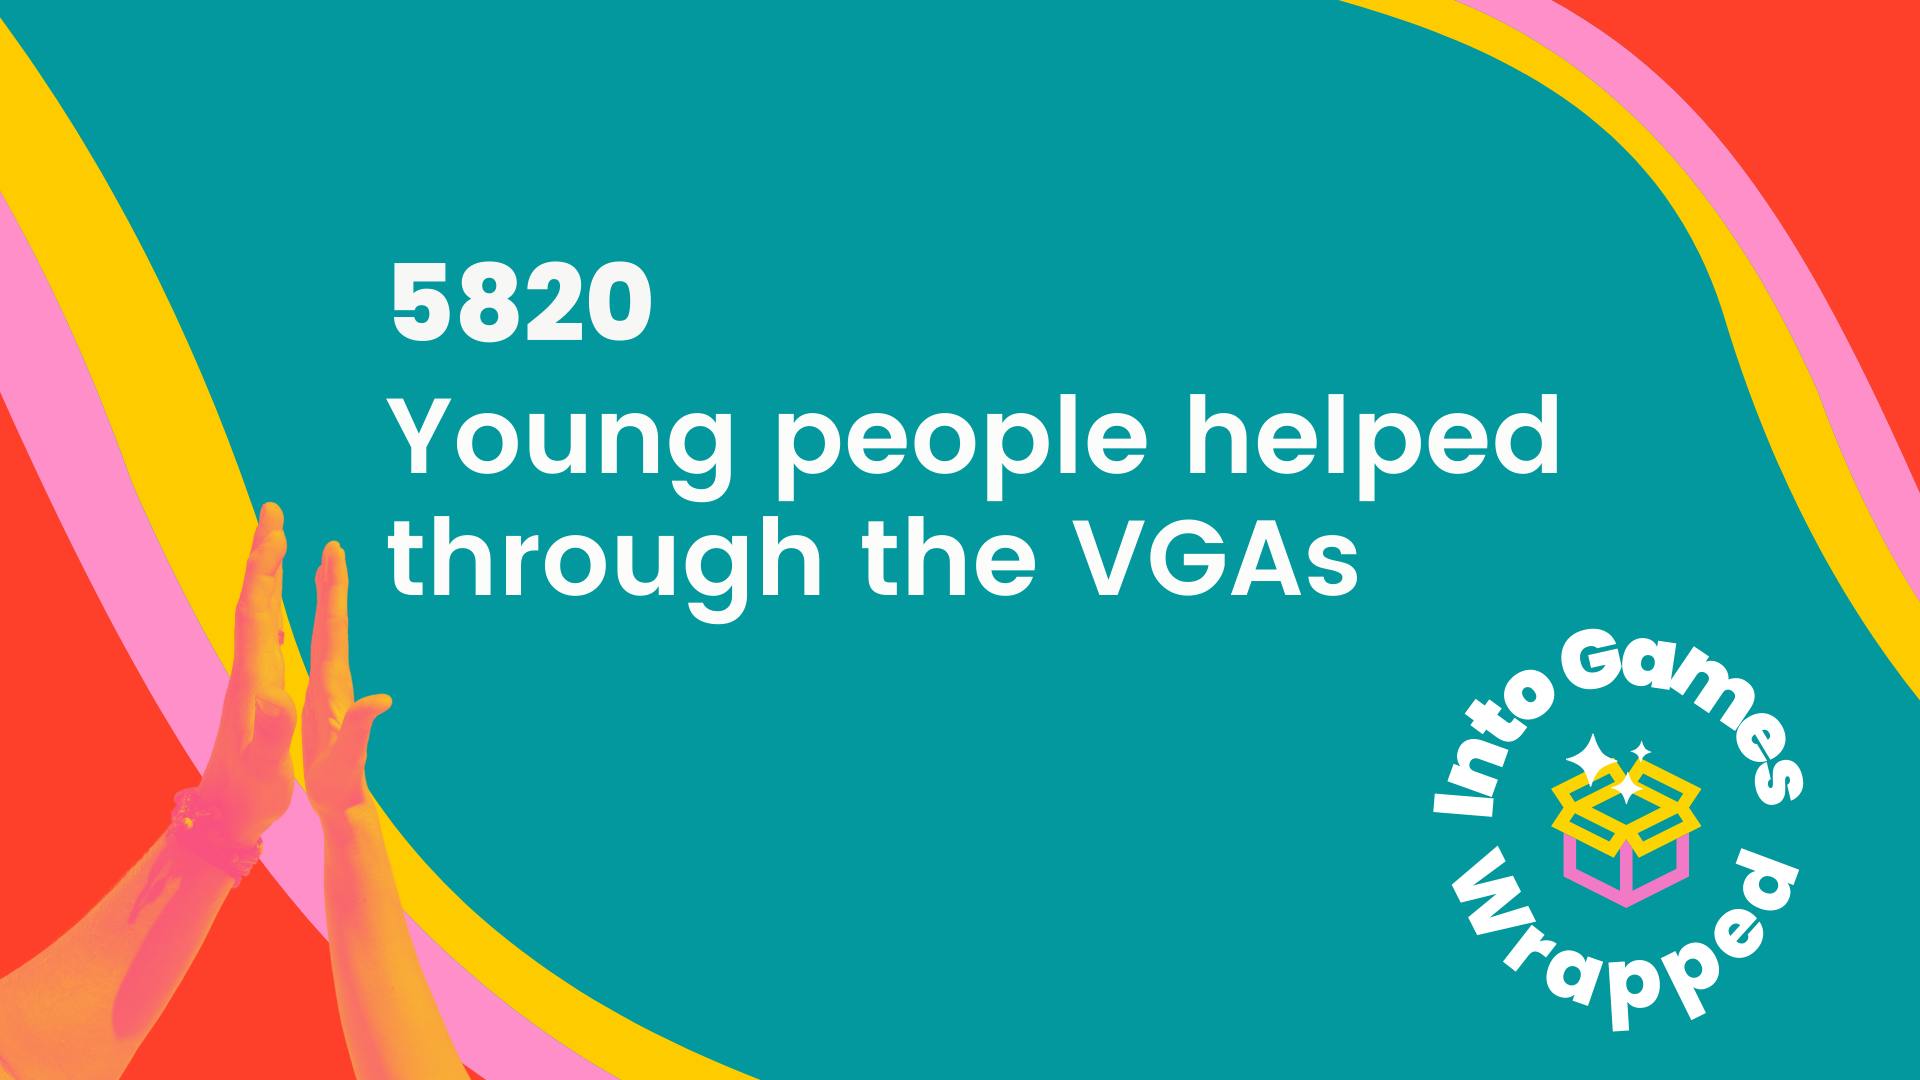 5820 young people helped through the VGAs